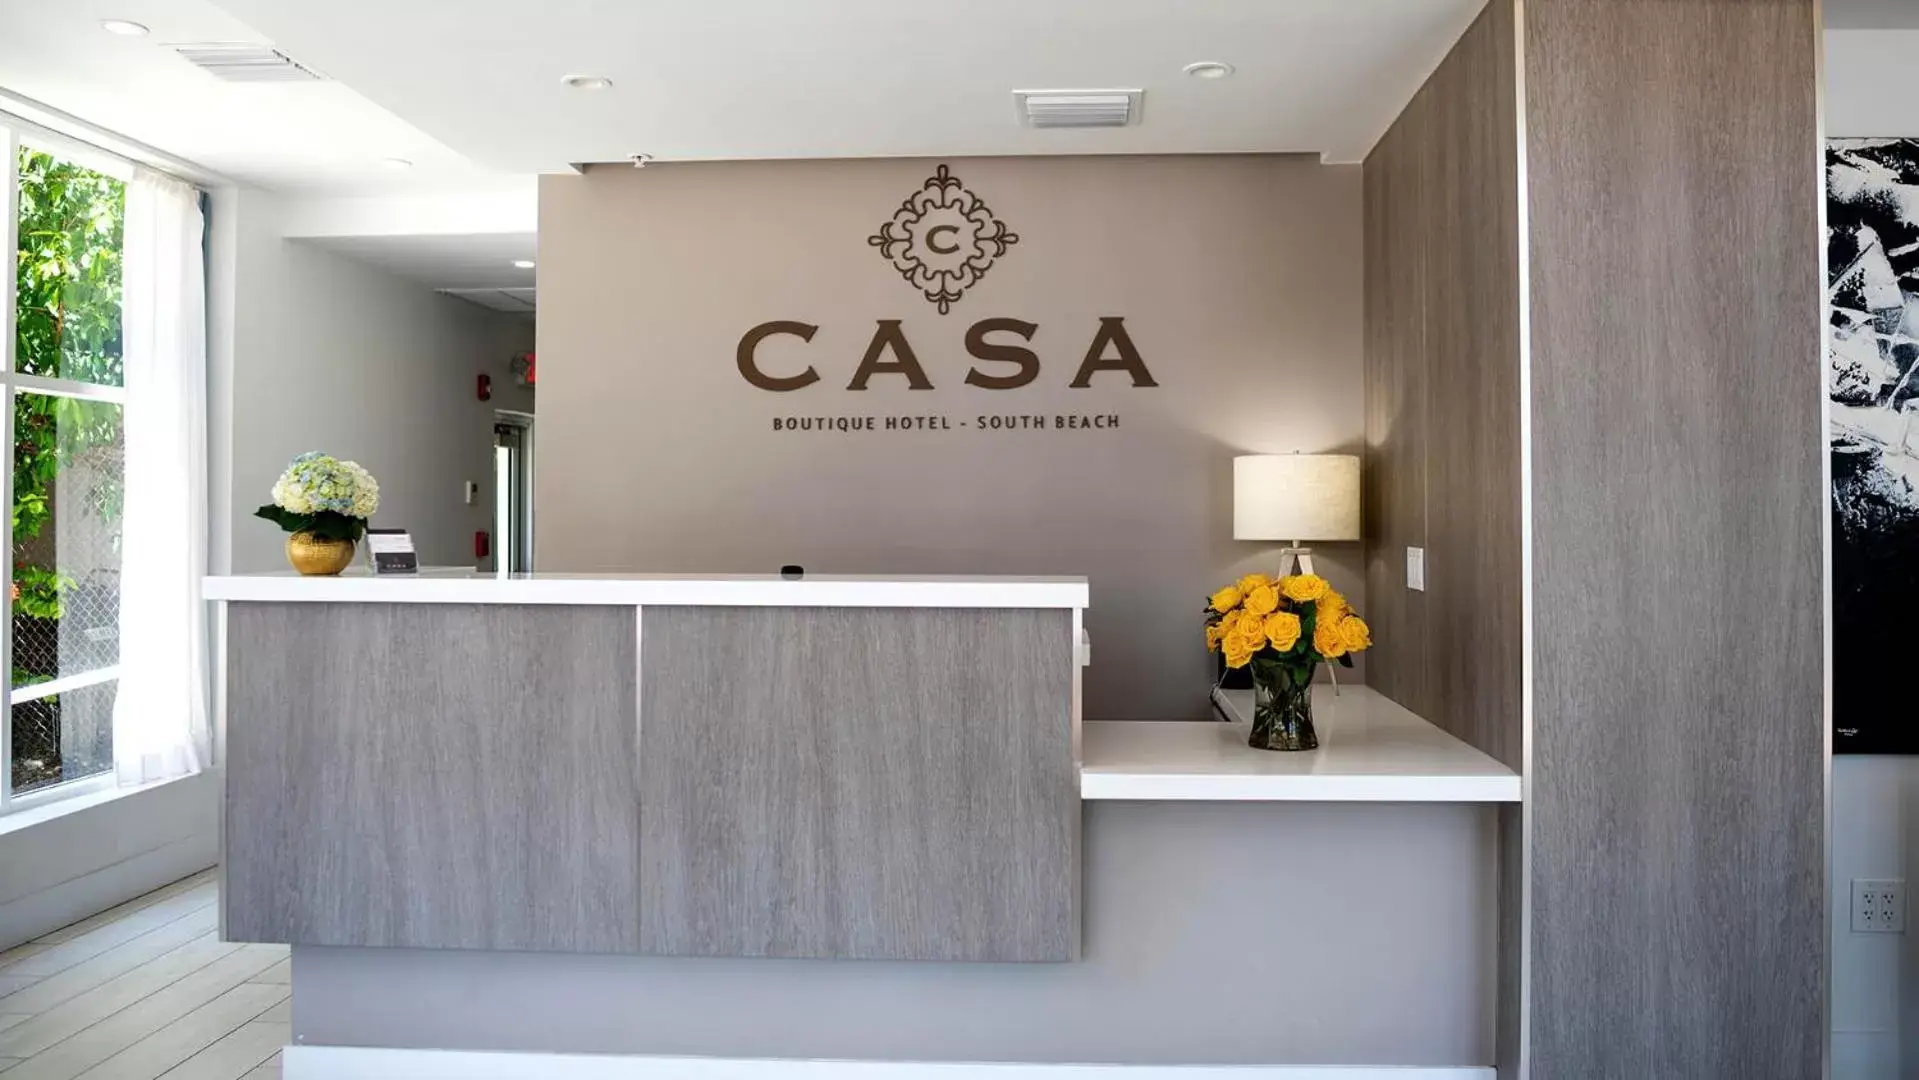 Property logo or sign, Lobby/Reception in Casa Boutique Hotel